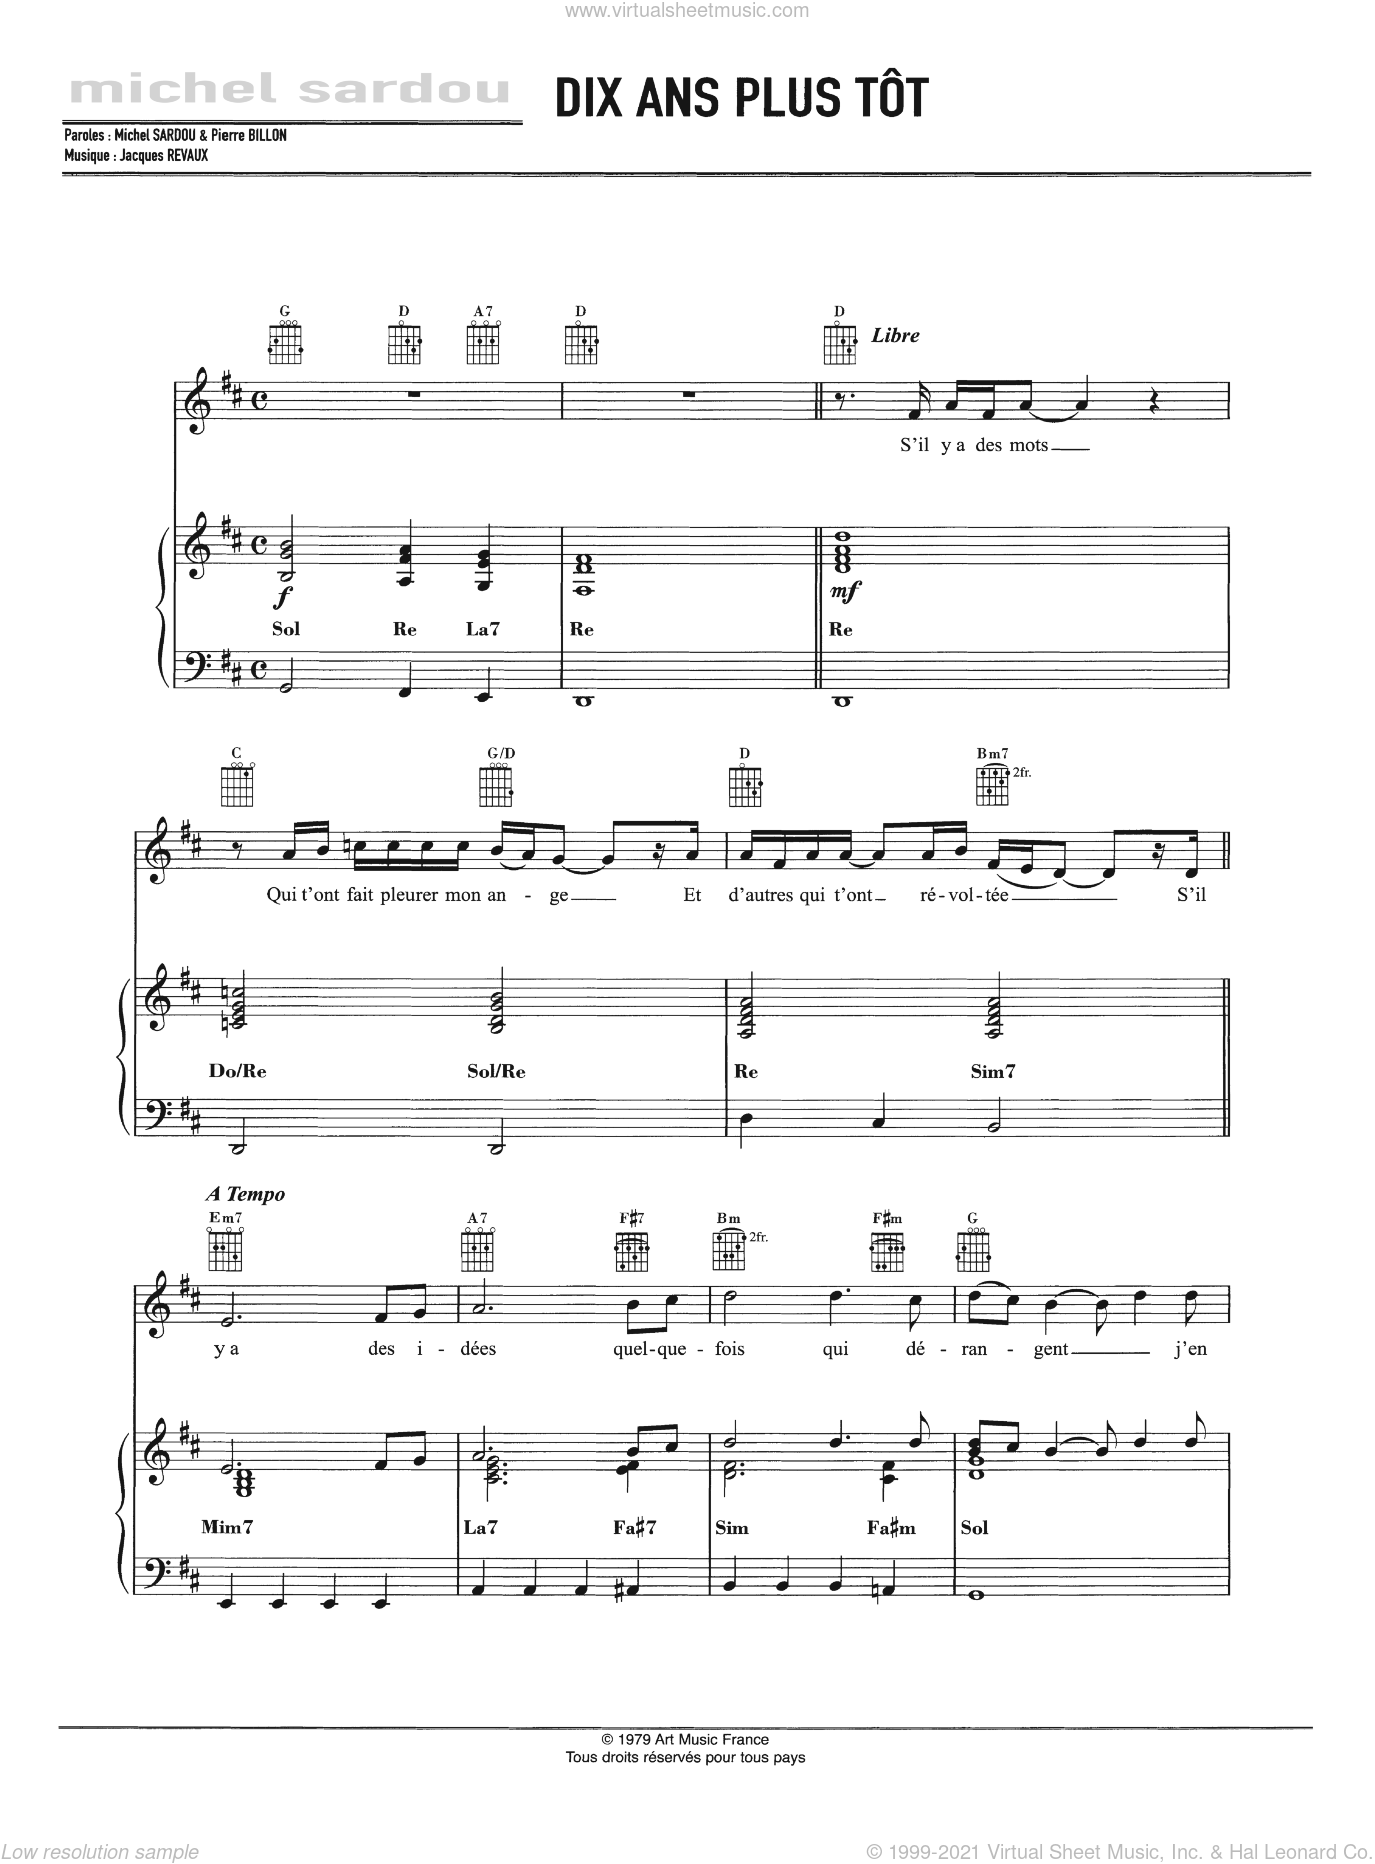 JE VOLE partition tablature Sheet music for Guitar (Solo)